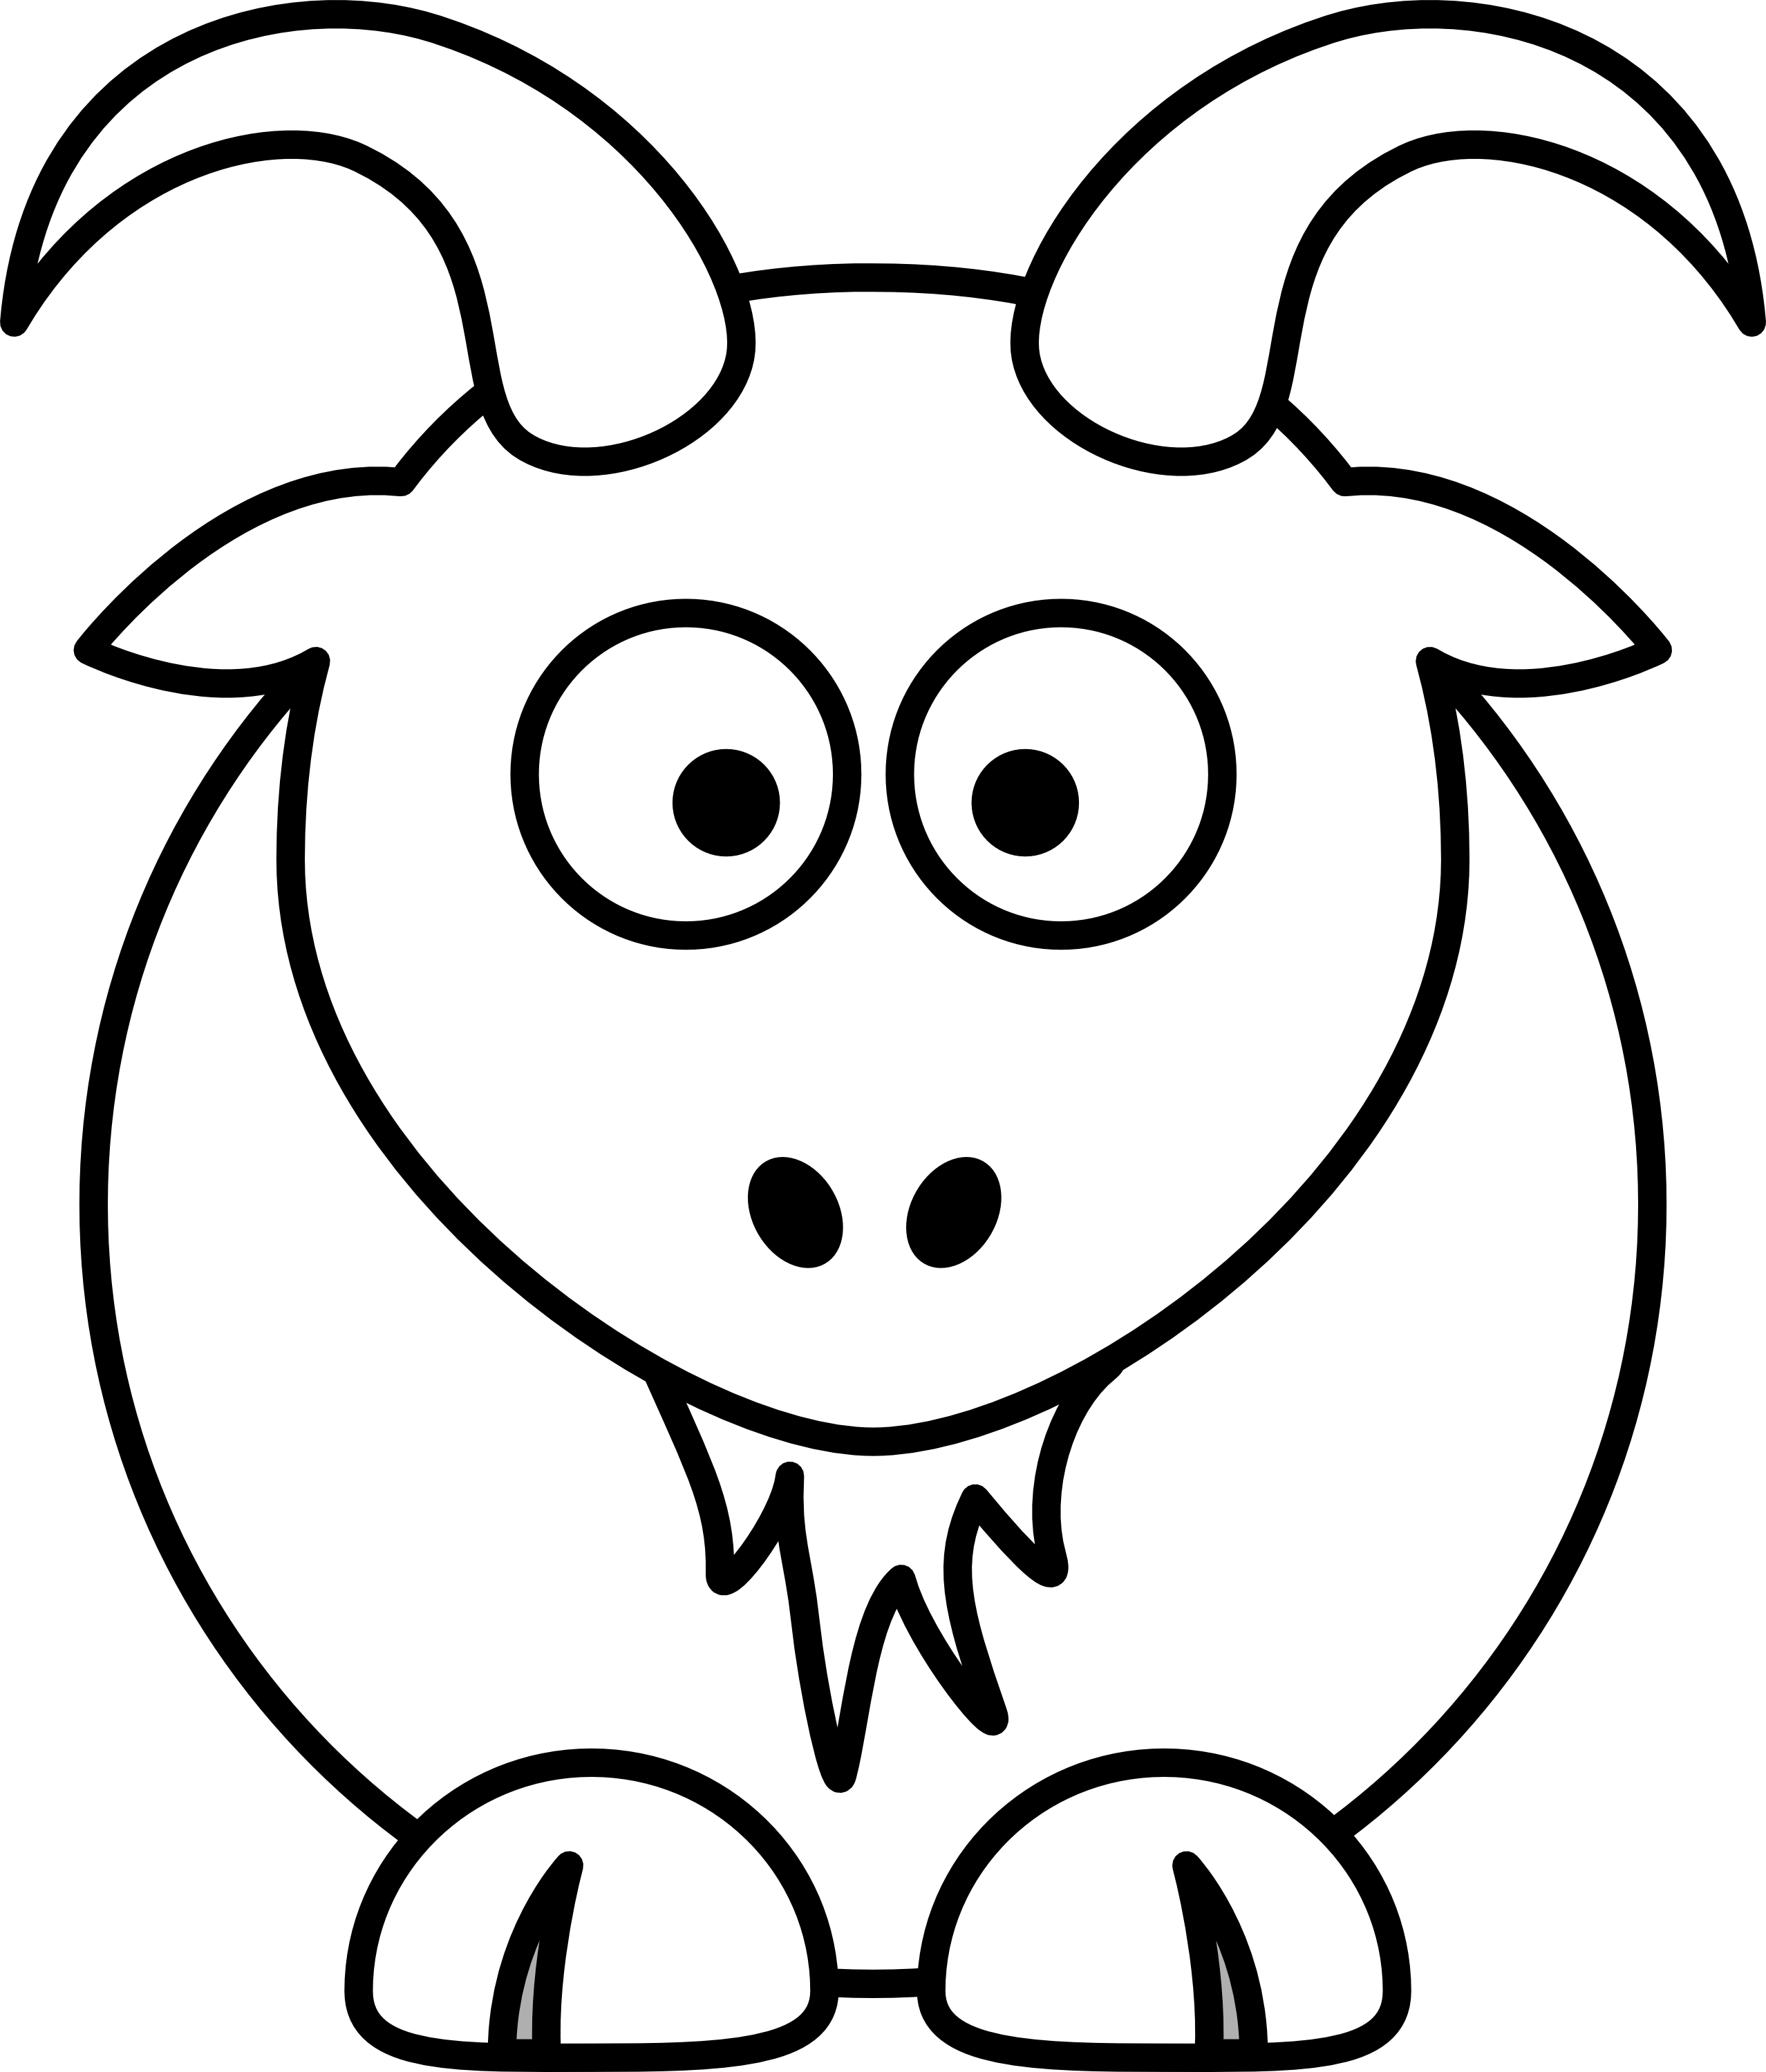 Black And White Clip Art Animals - Clipart library